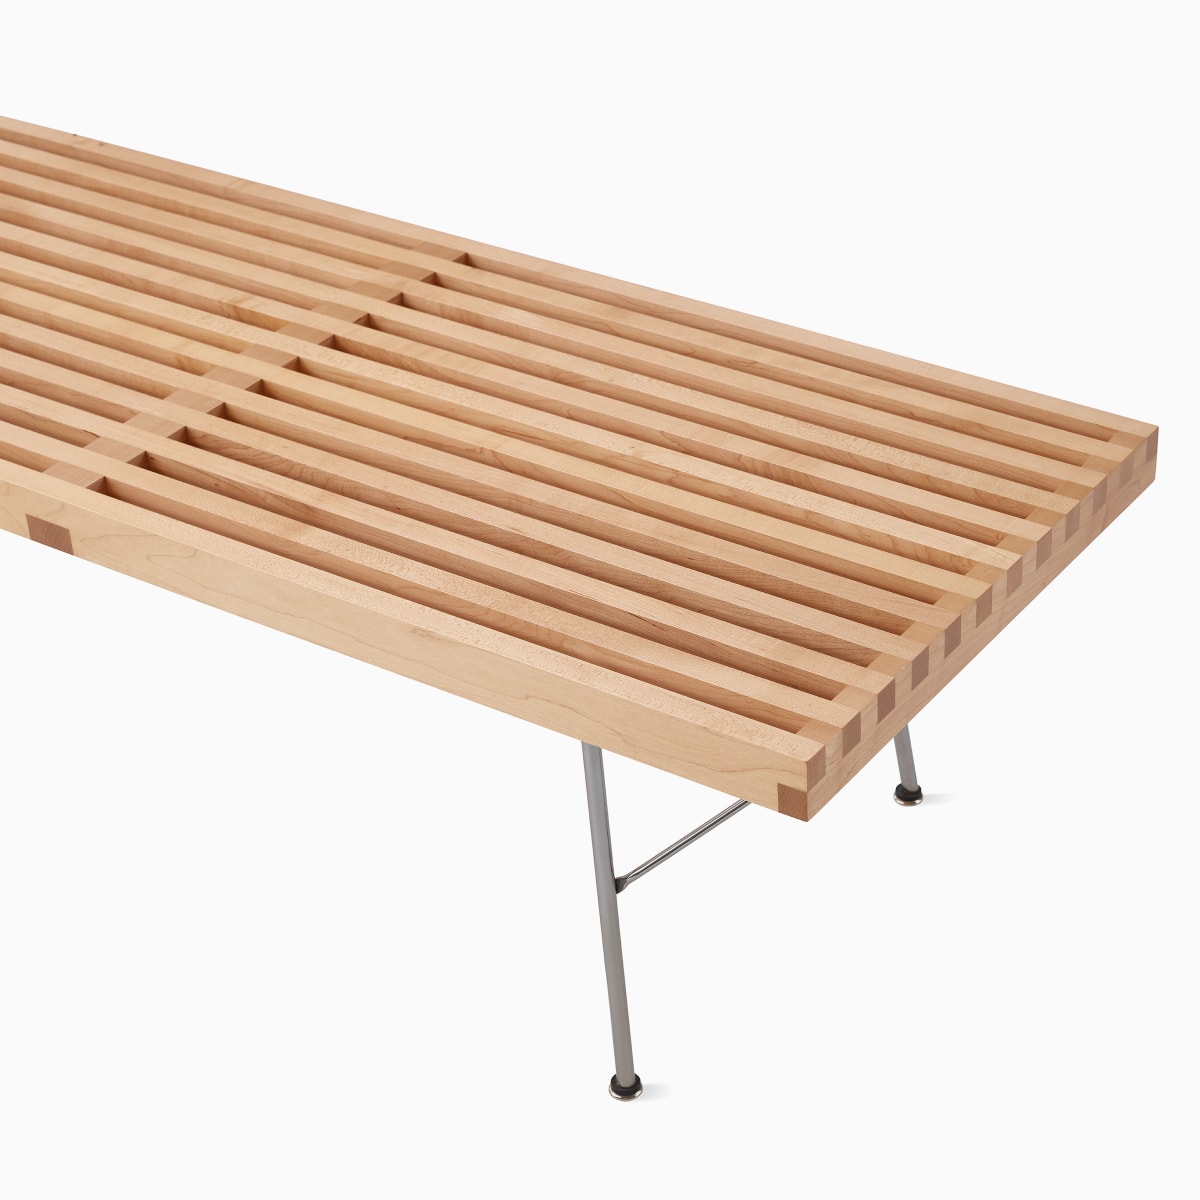 A close-up detail of the Nelson Platform Bench highlighting the solid-wood slats.